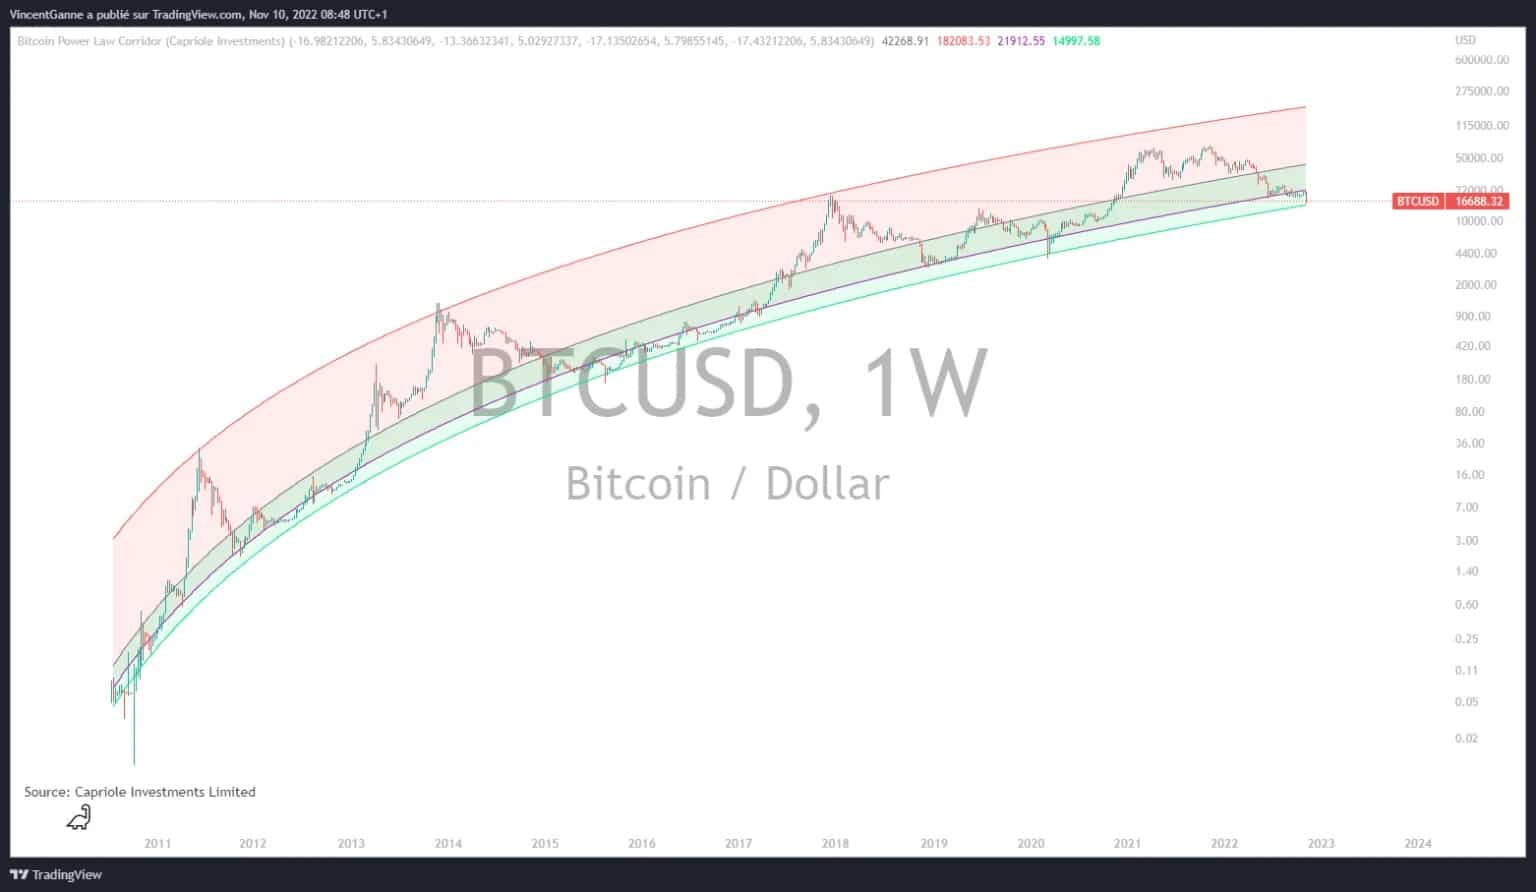 Chart exposing the Bitcoin Power Low Corridor indicator from Capriole Investments Limited